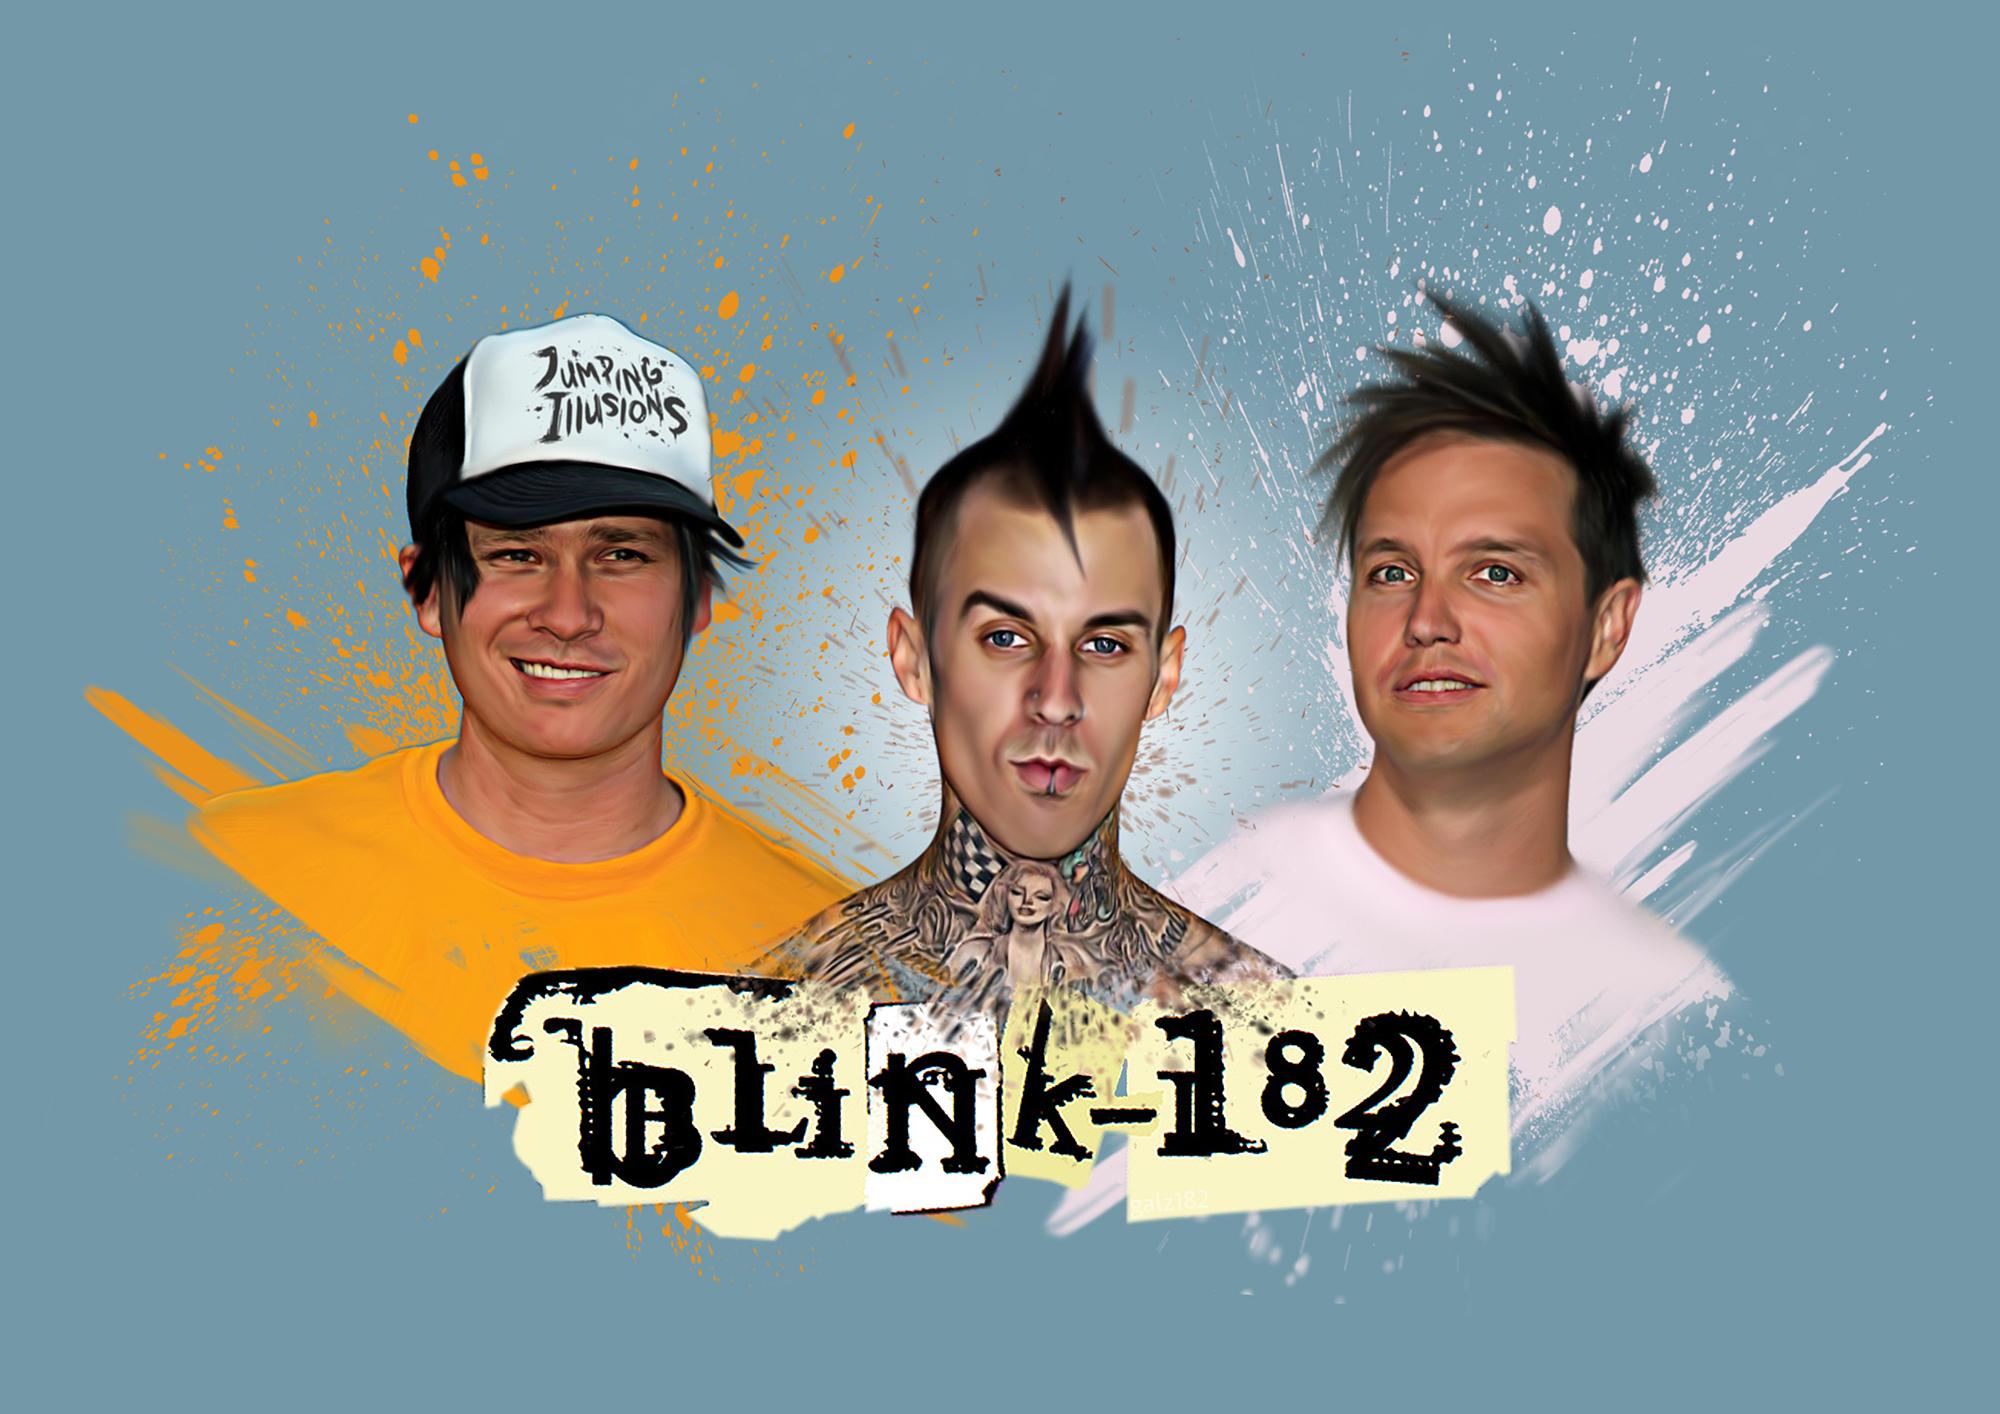 I Decided To Create My Own Blink Wallpaper Going Make It